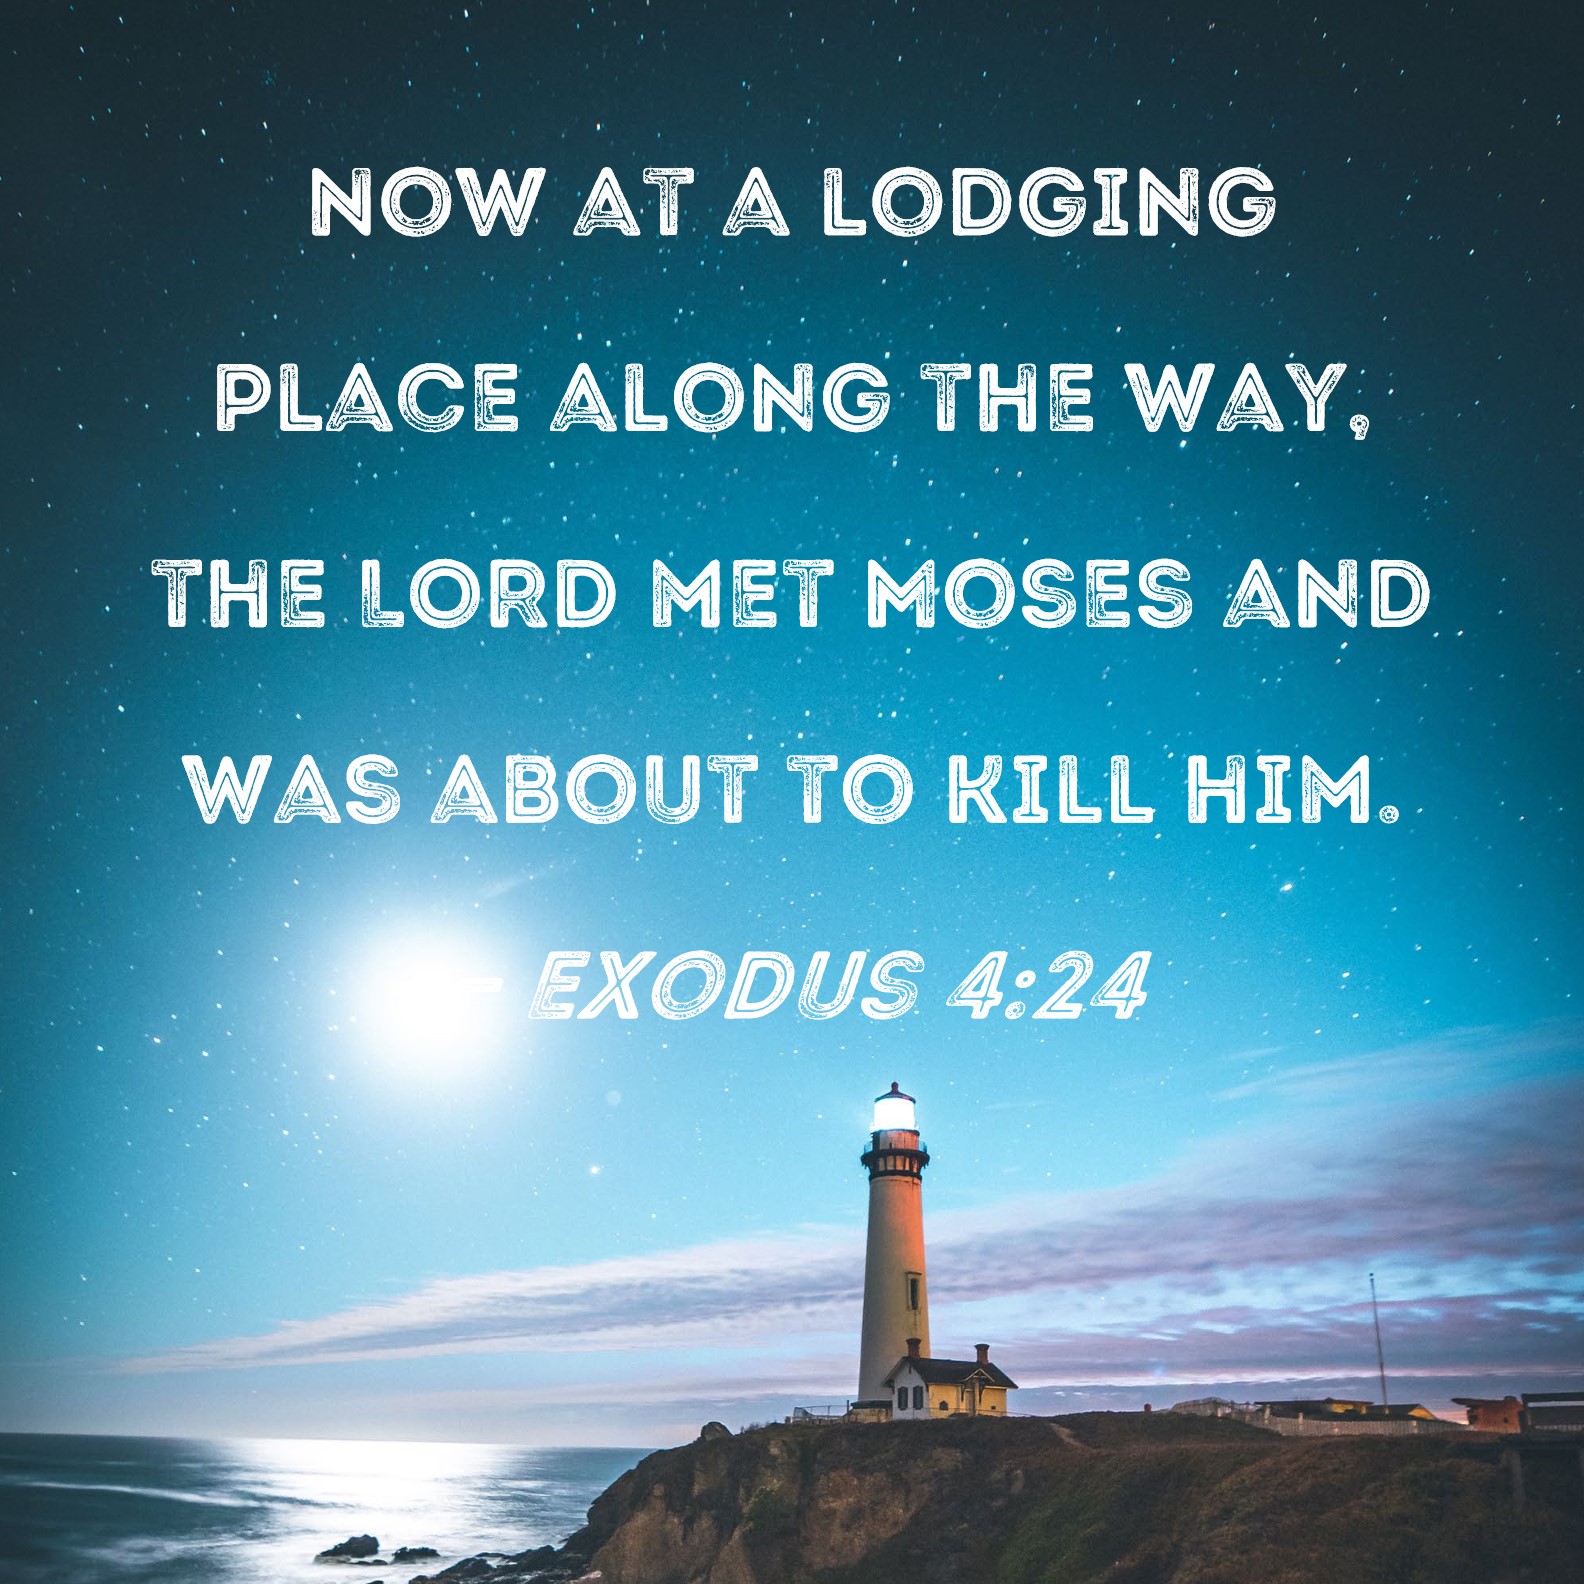 Exodus - Bible Verse Meaning and Commentary